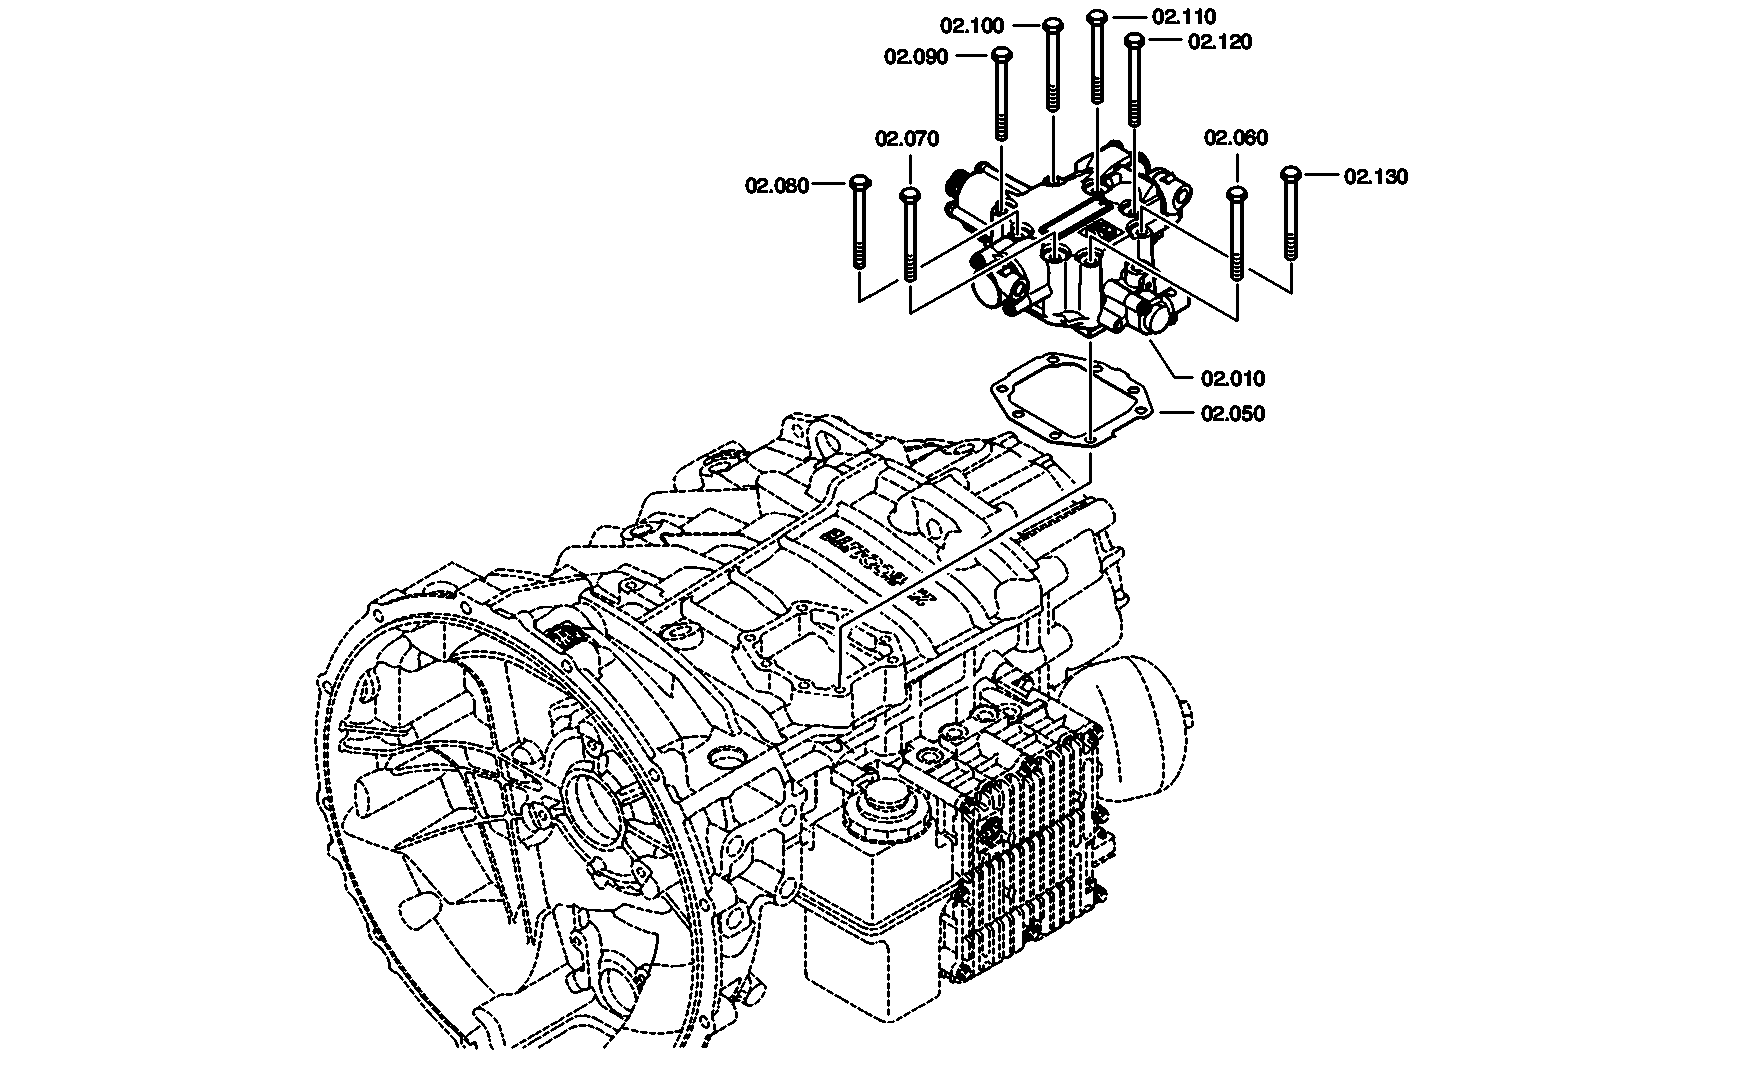 drawing for DAF 1780803 - TRANSMISSION ACTUATOR (figure 1)